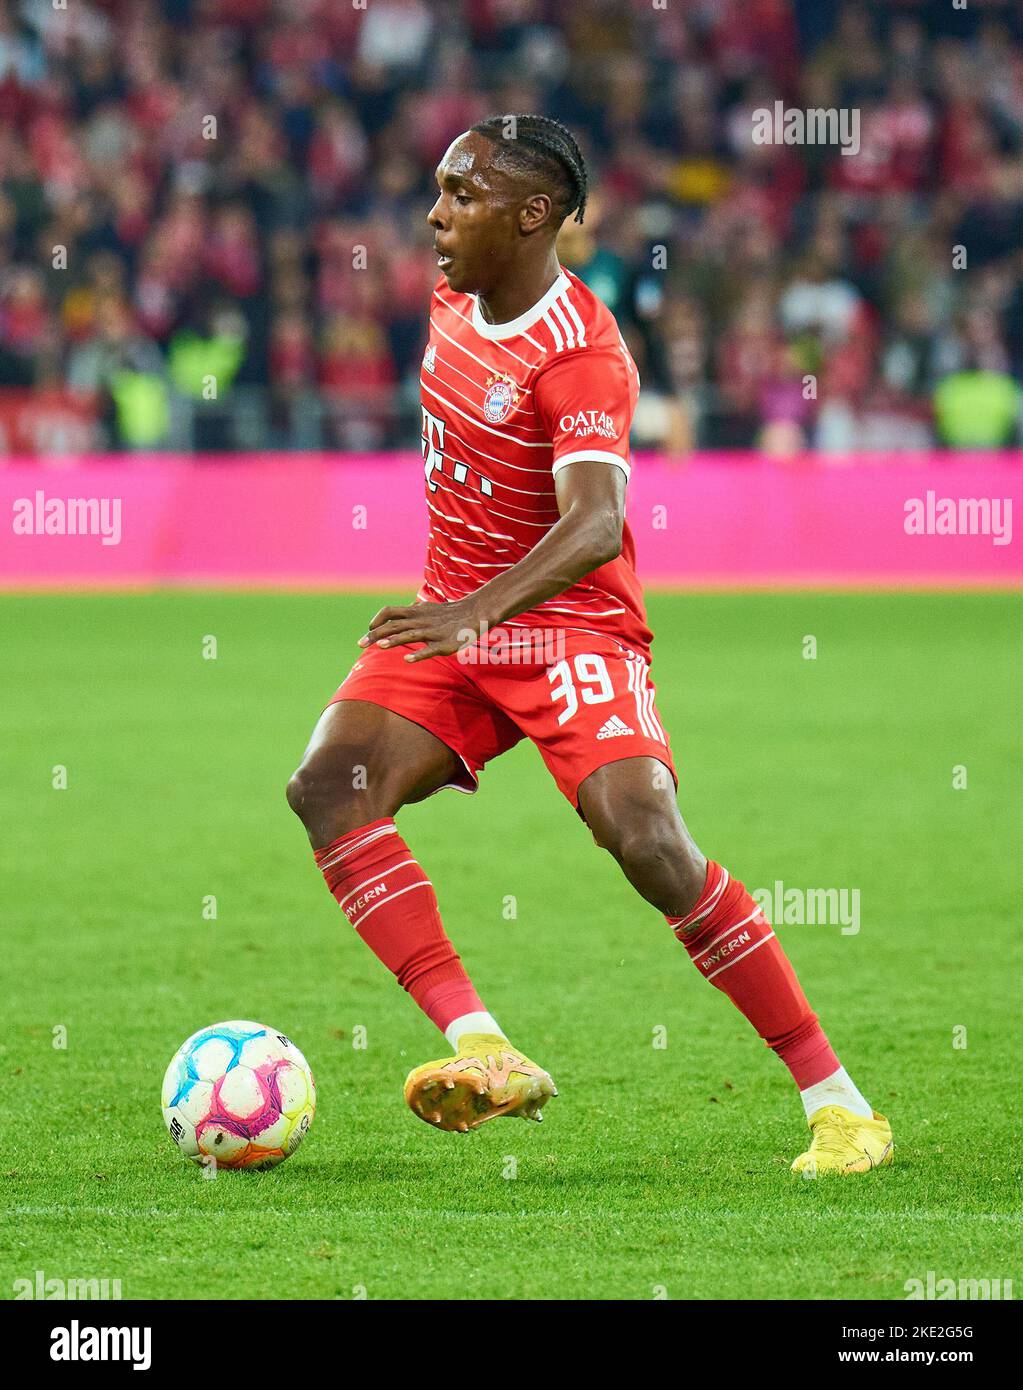 Mathys Tel, FCB 39   in the match FC BAYERN MÜNCHEN - SV WERDER BREMEN 6-1 1.German Football League on Nov 8, 2022 in Munich, Germany. Season 2022/2023, matchday 14, 1.Bundesliga, FCB, München, 14.Spieltag © Peter Schatz / Alamy Live News    - DFL REGULATIONS PROHIBIT ANY USE OF PHOTOGRAPHS as IMAGE SEQUENCES and/or QUASI-VIDEO - Stock Photo